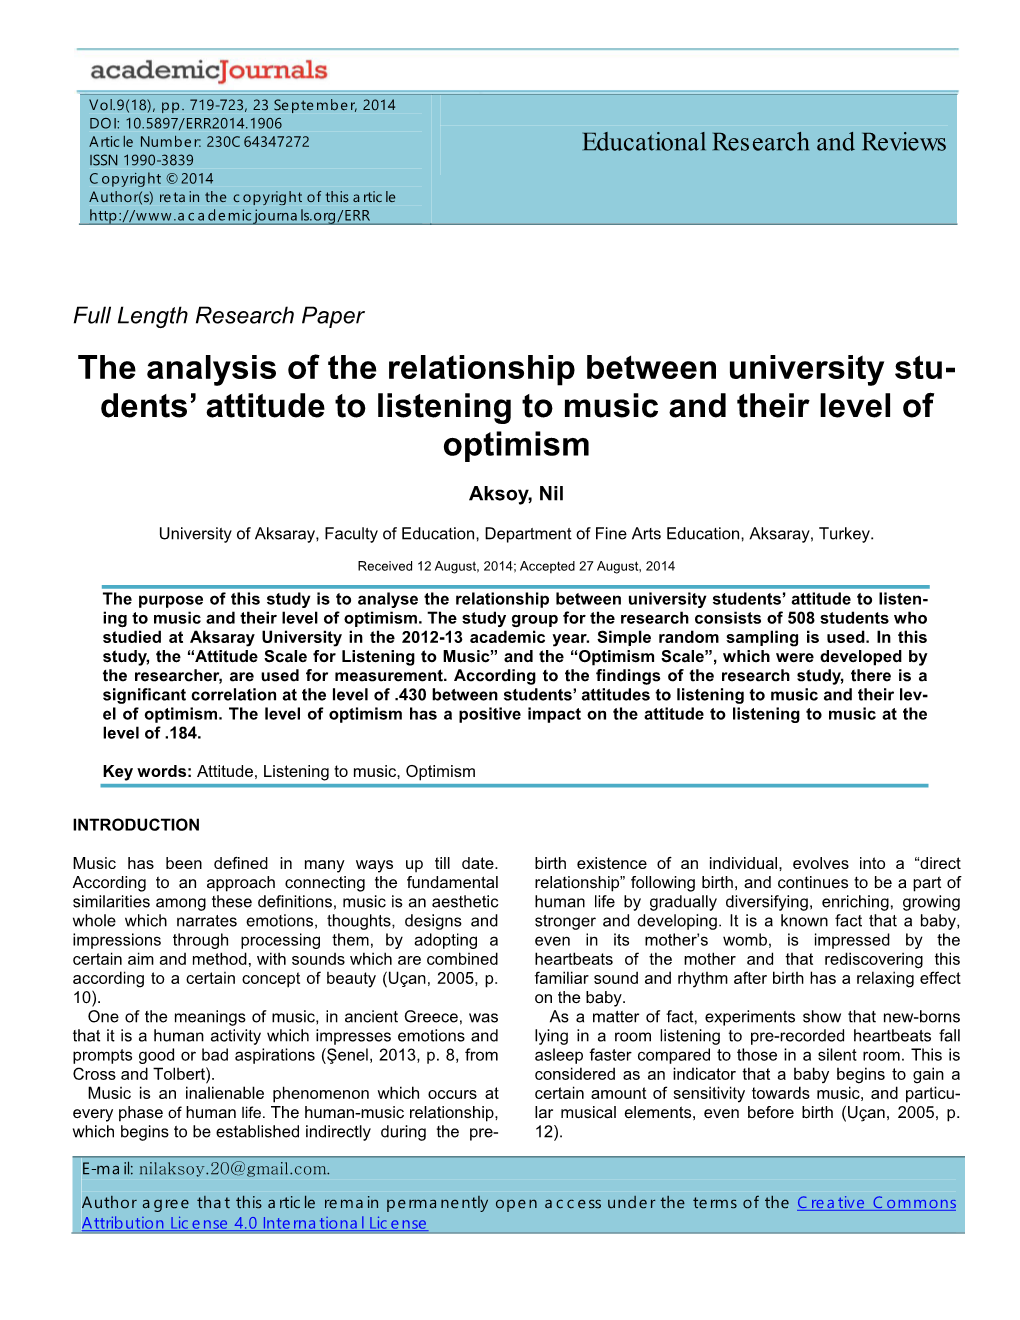 The Analysis of the Relationship Between University Stu- Dents' Attitude to Listening to Music and Their Level of Optimism